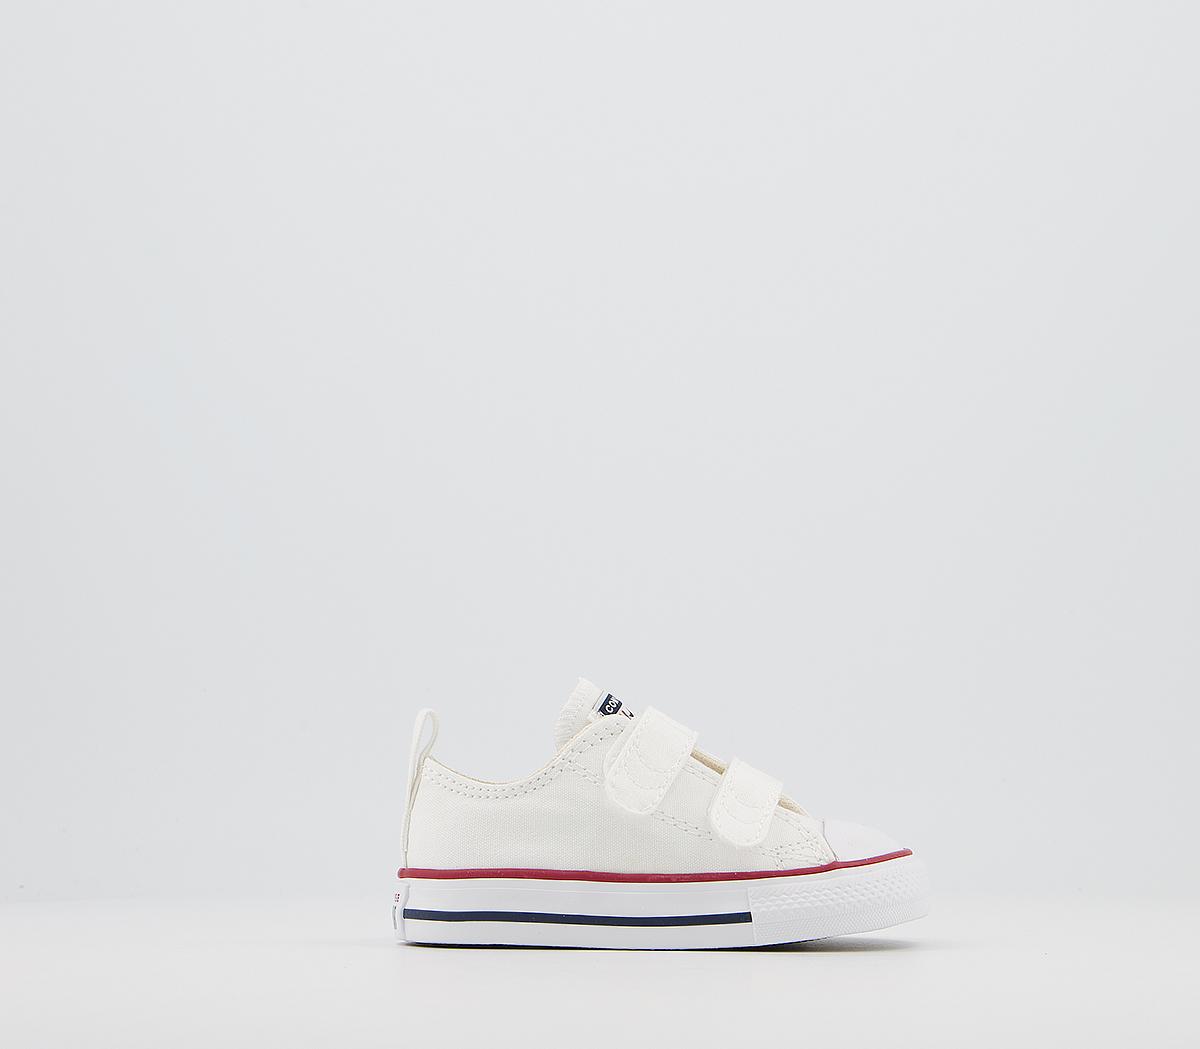 converse all star 2vlace optical white leather